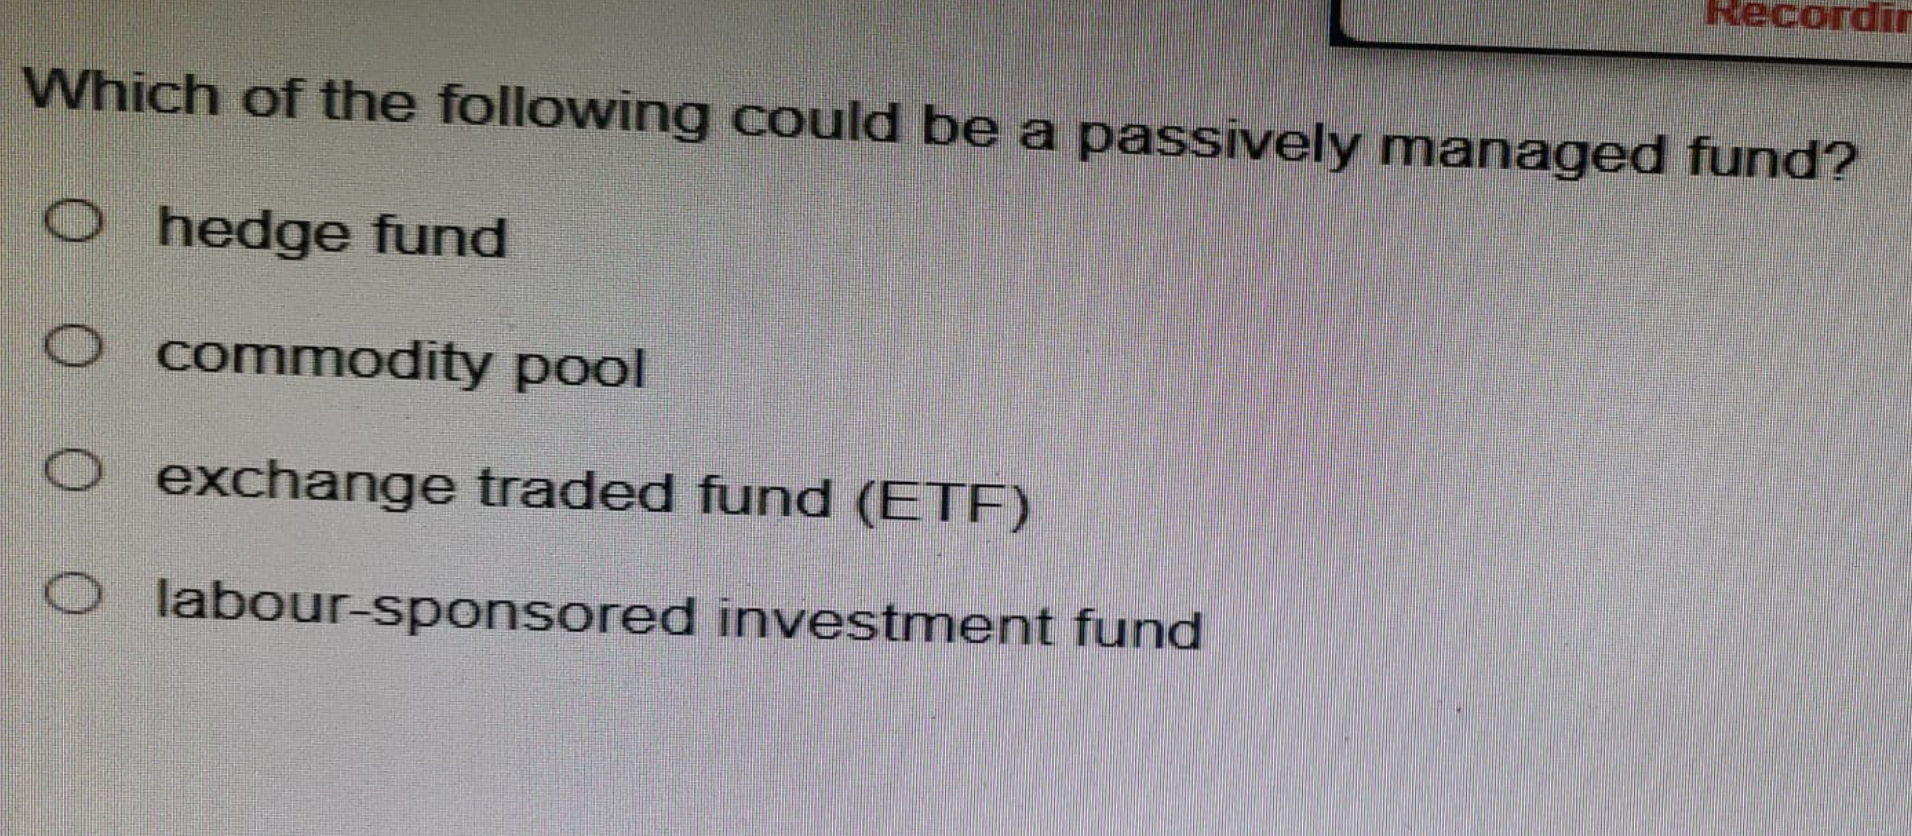 Recordin
Which of the following could be a passively managed fund?
O hedge fund
O commodity pool
O exchange traded fund (ETF)
O labour-sponsored investment fund